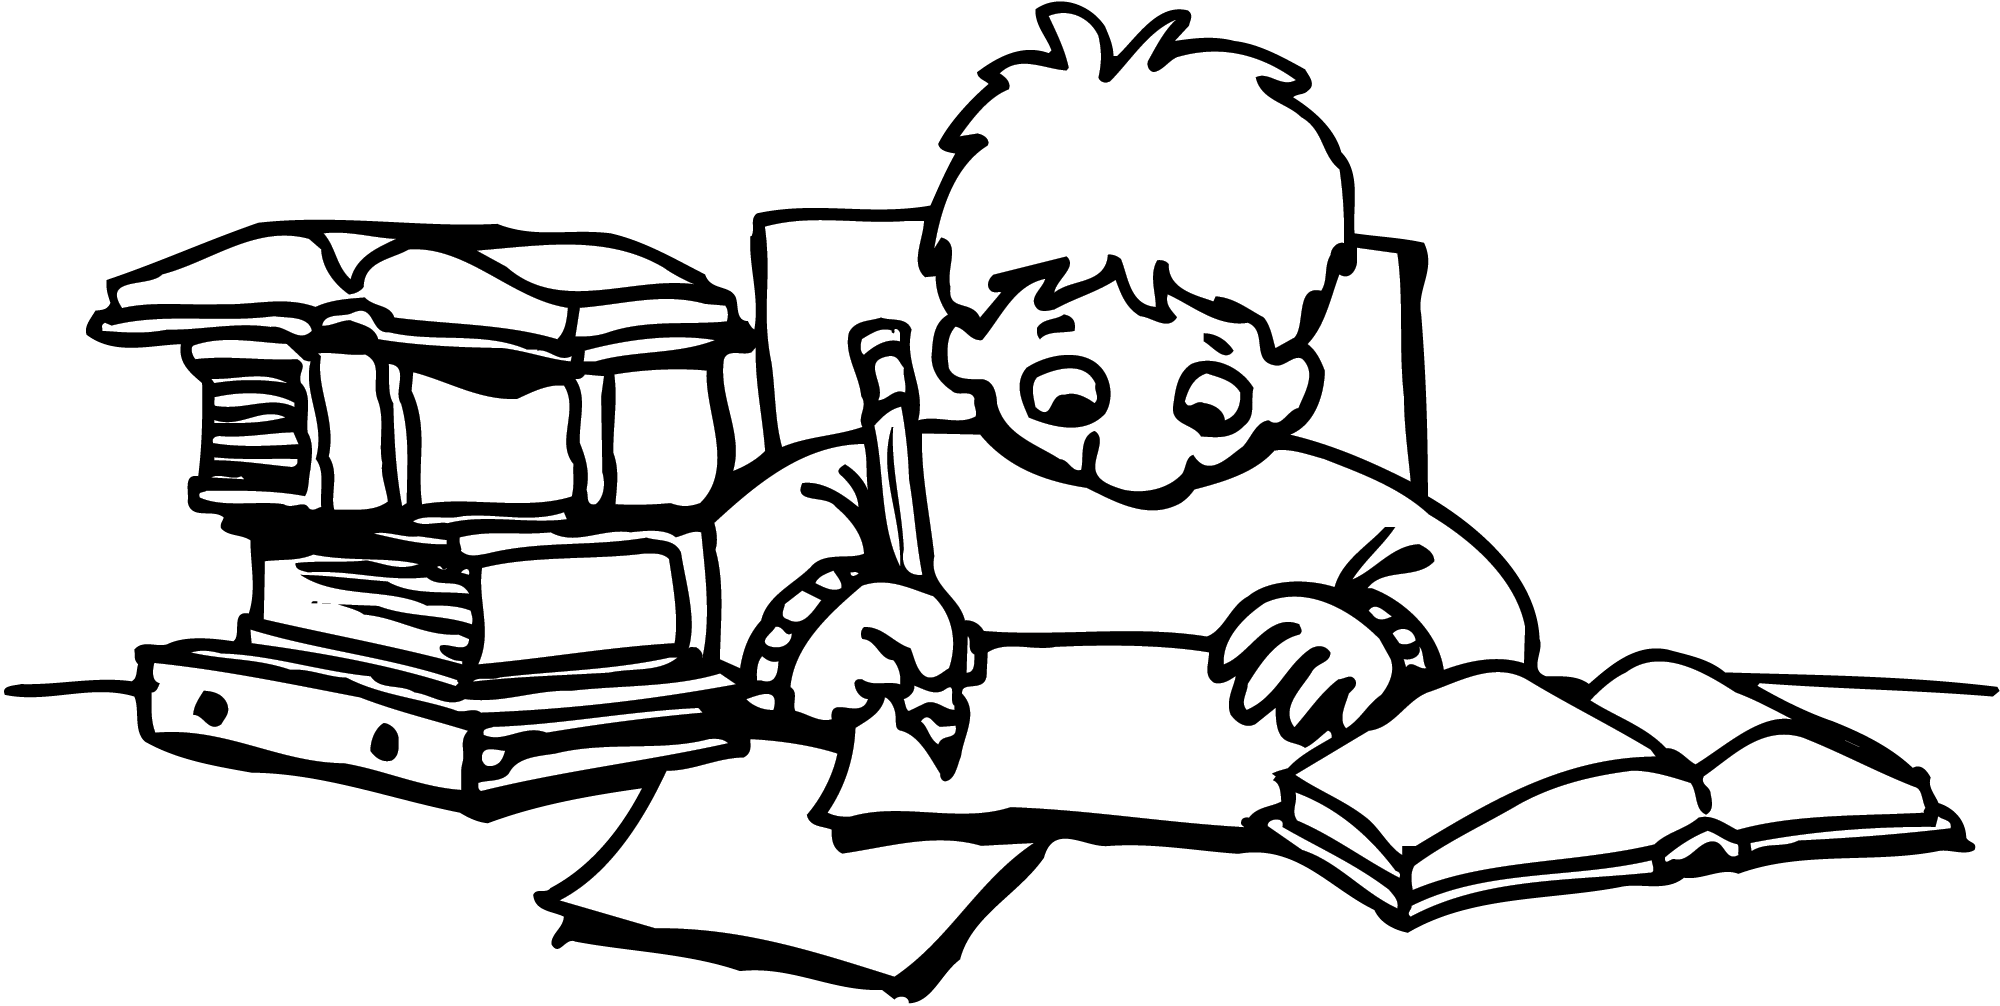 Boy studying clipart black and white 